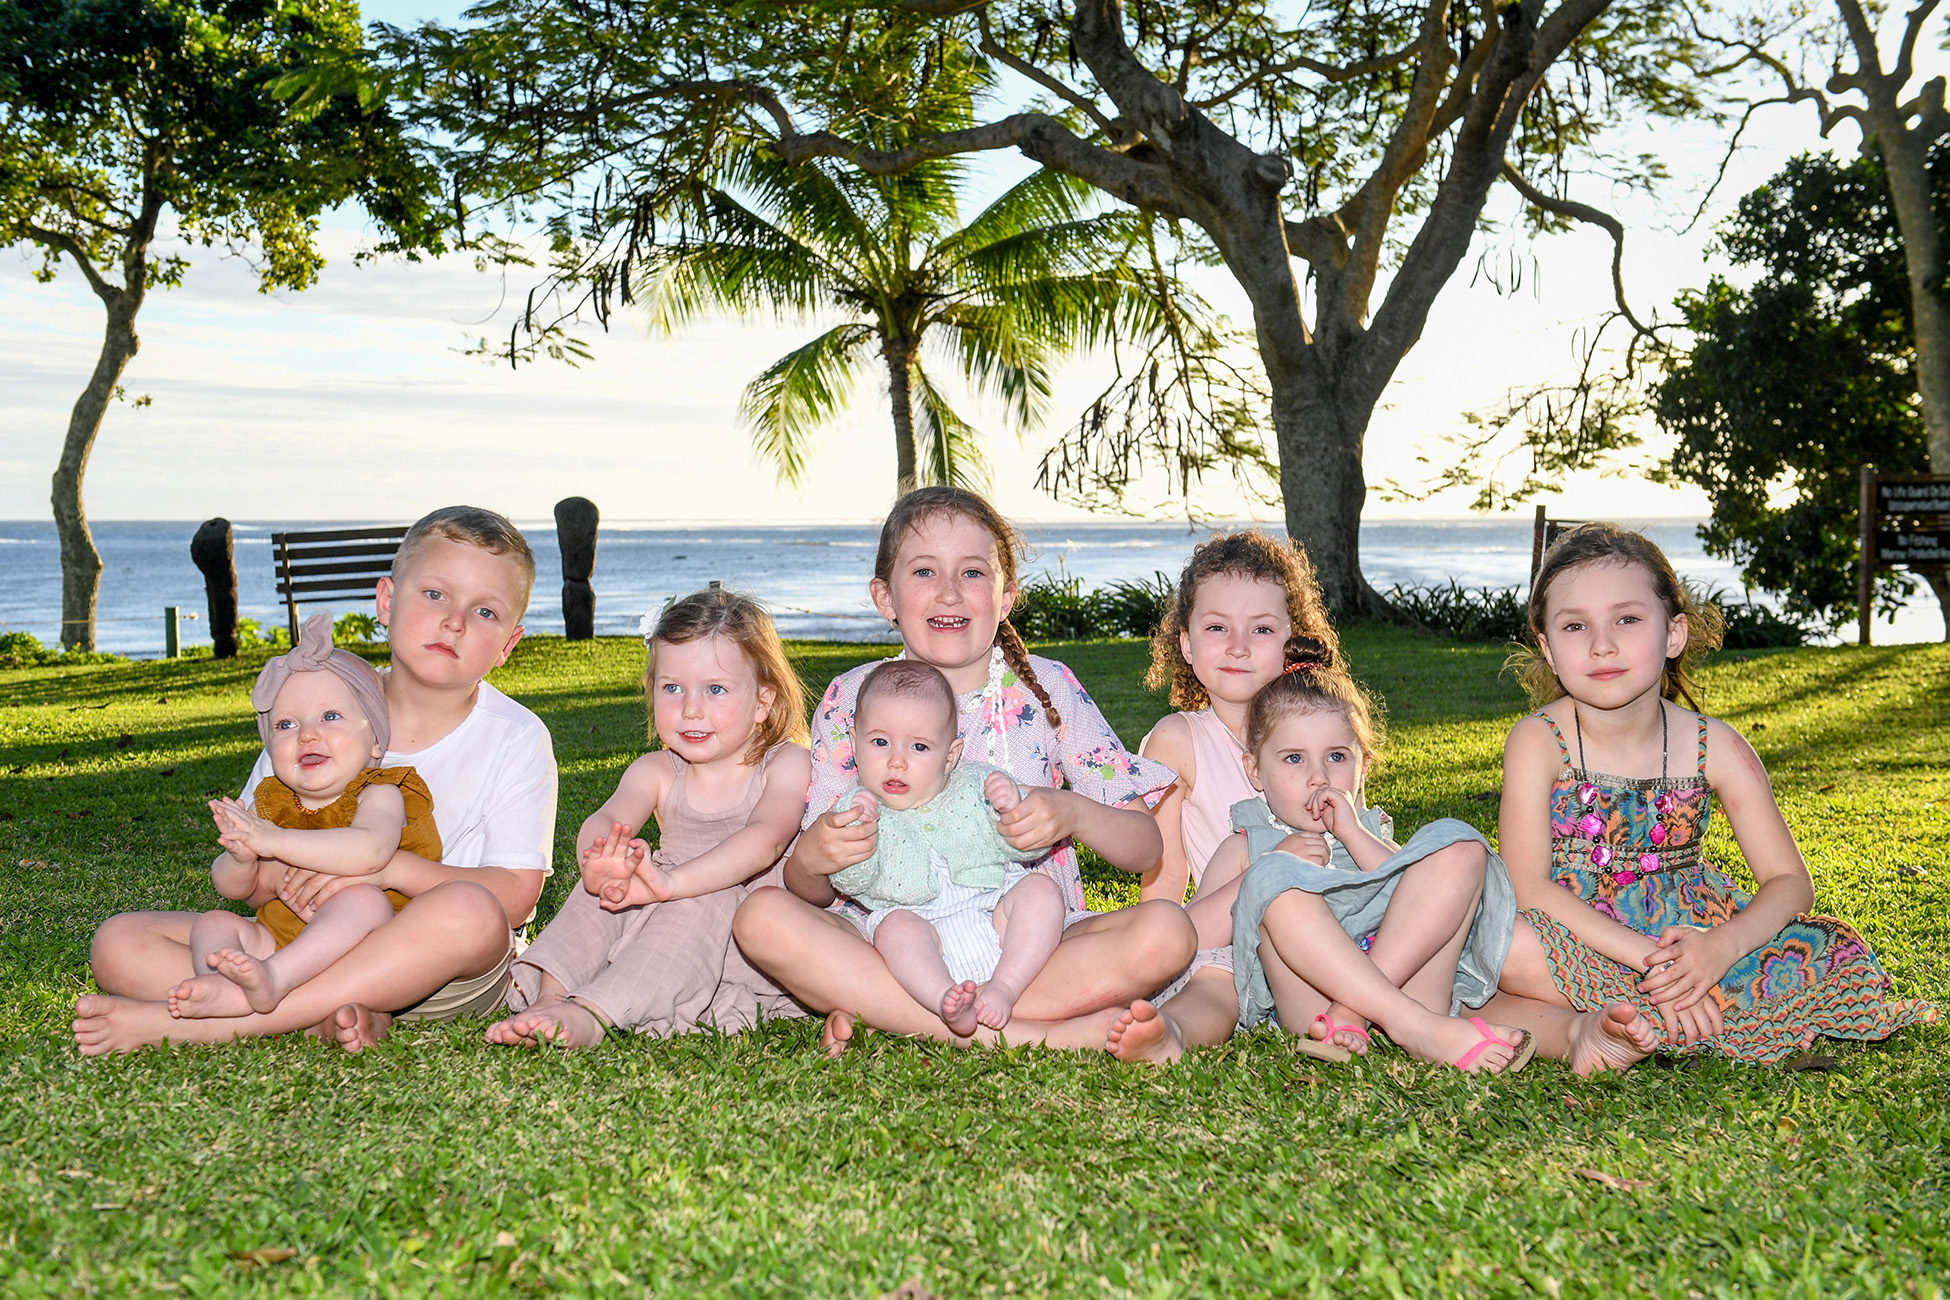 Group shot of cousins together during their photoshoot in Fiji